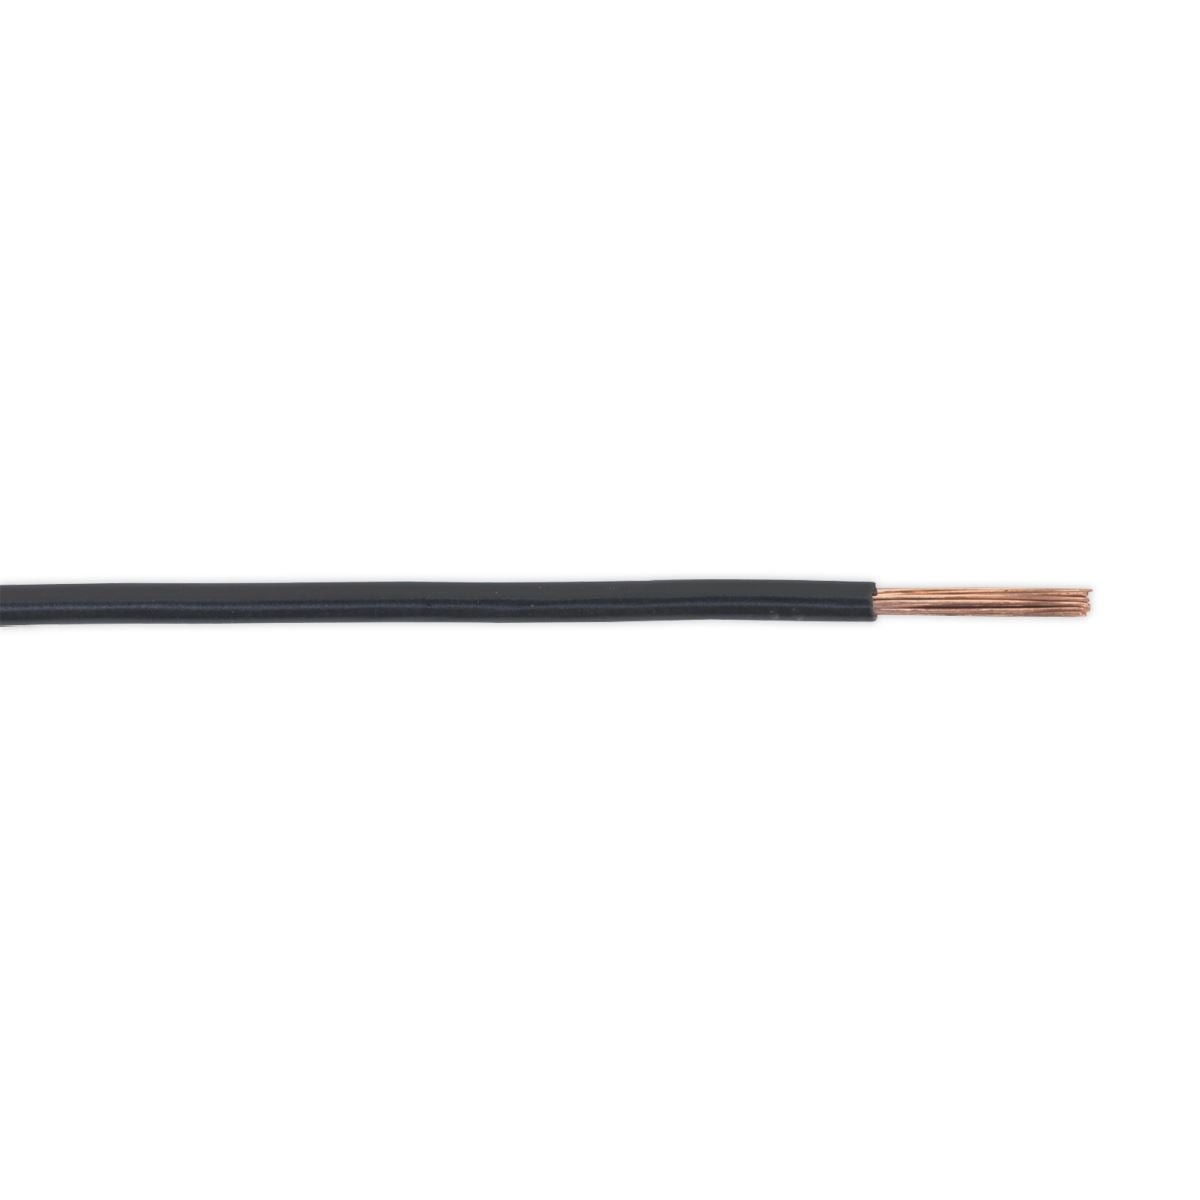 Sealey Automotive Cable Thin Wall Single 2mm² 28/0.30mm 50m Black